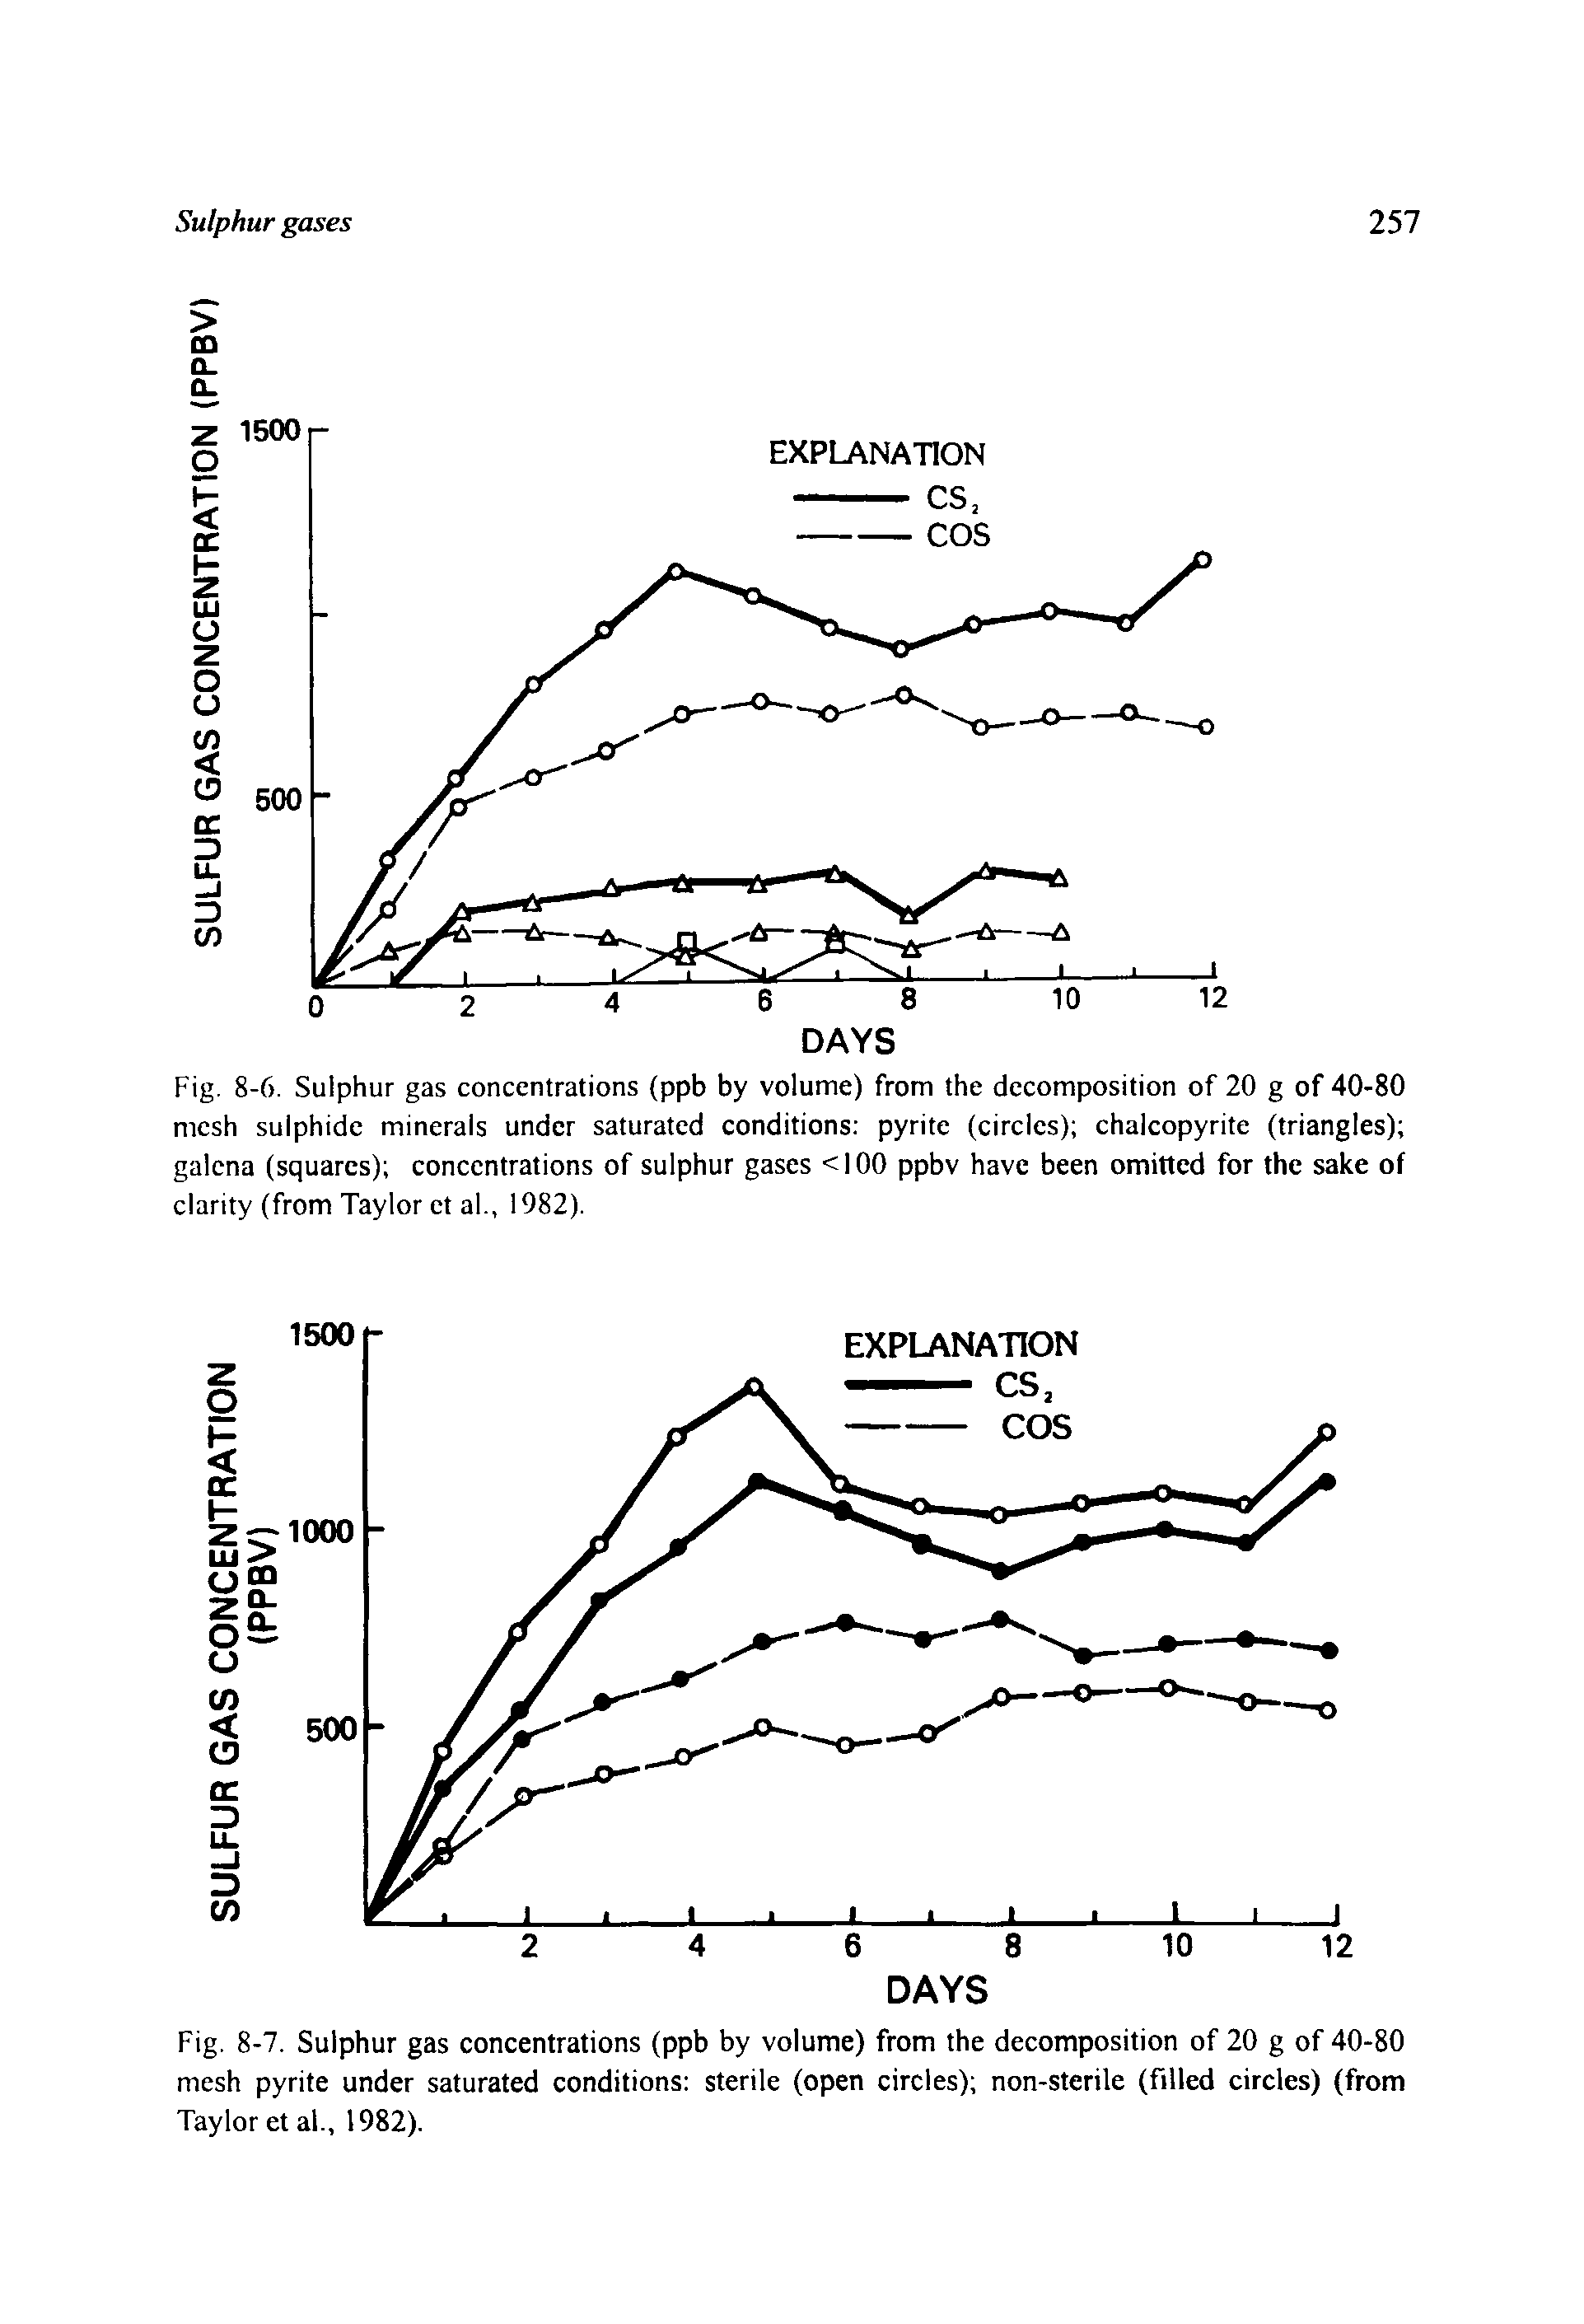 Fig. 8-7. Sulphur gas concentrations (ppb by volume) from the decomposition of 20 g of 40-80 mesh pyrite under saturated conditions sterile (open circles) non-sterile (filled circles) (from Taylor et al., 1982).